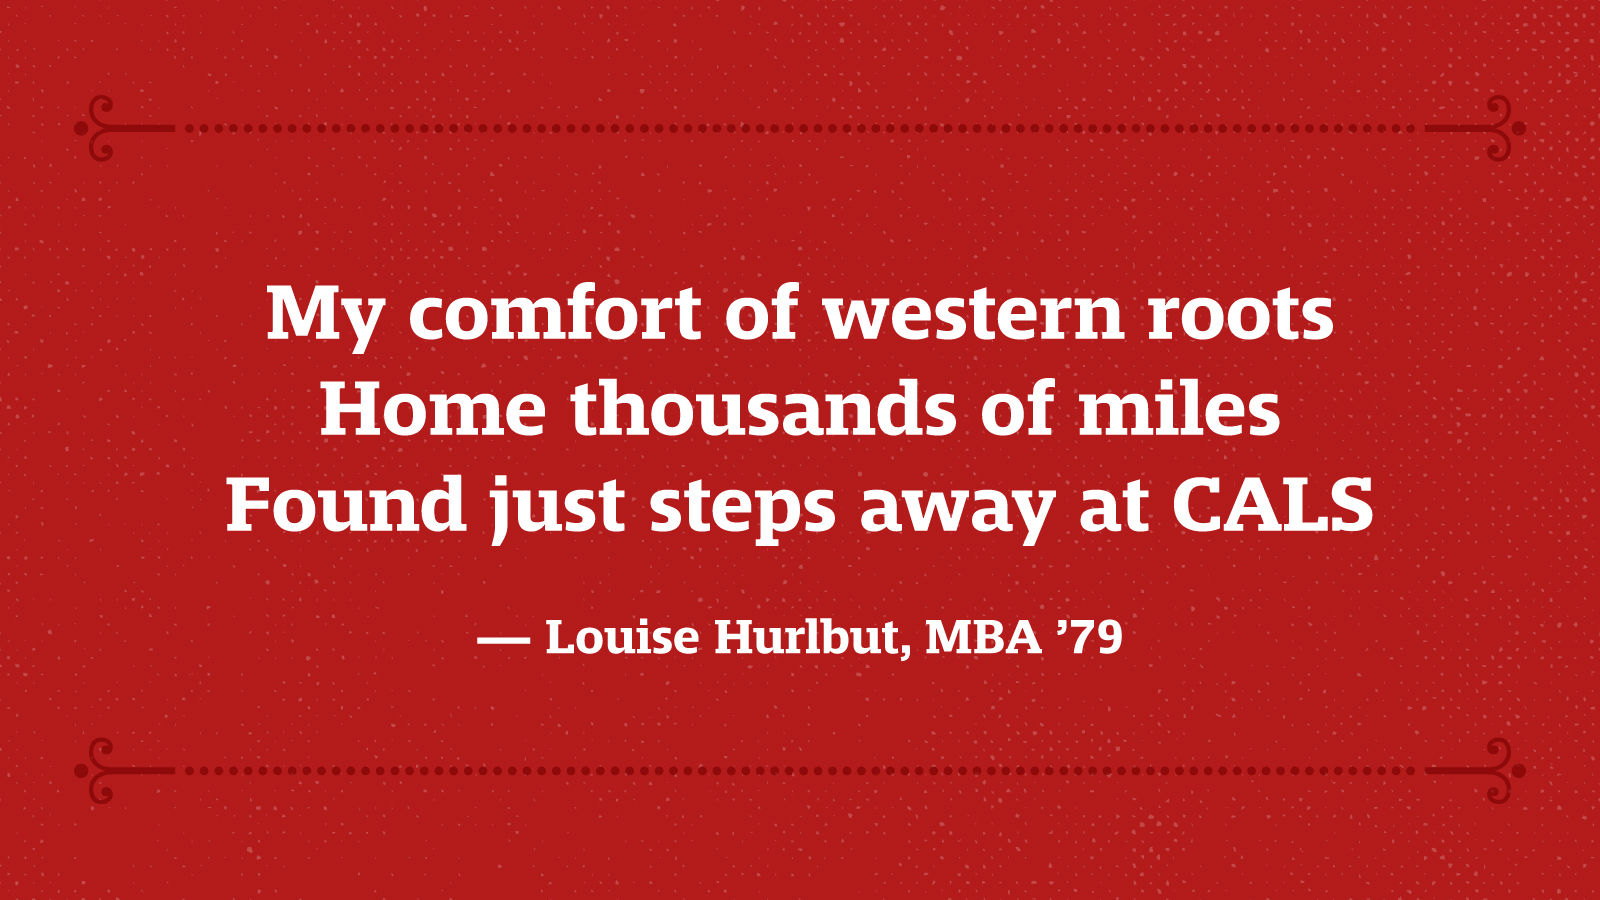 My comfort of western roots Home thousands of miles Found just steps away at CALS — Louise Hurlbut, MBA ’79